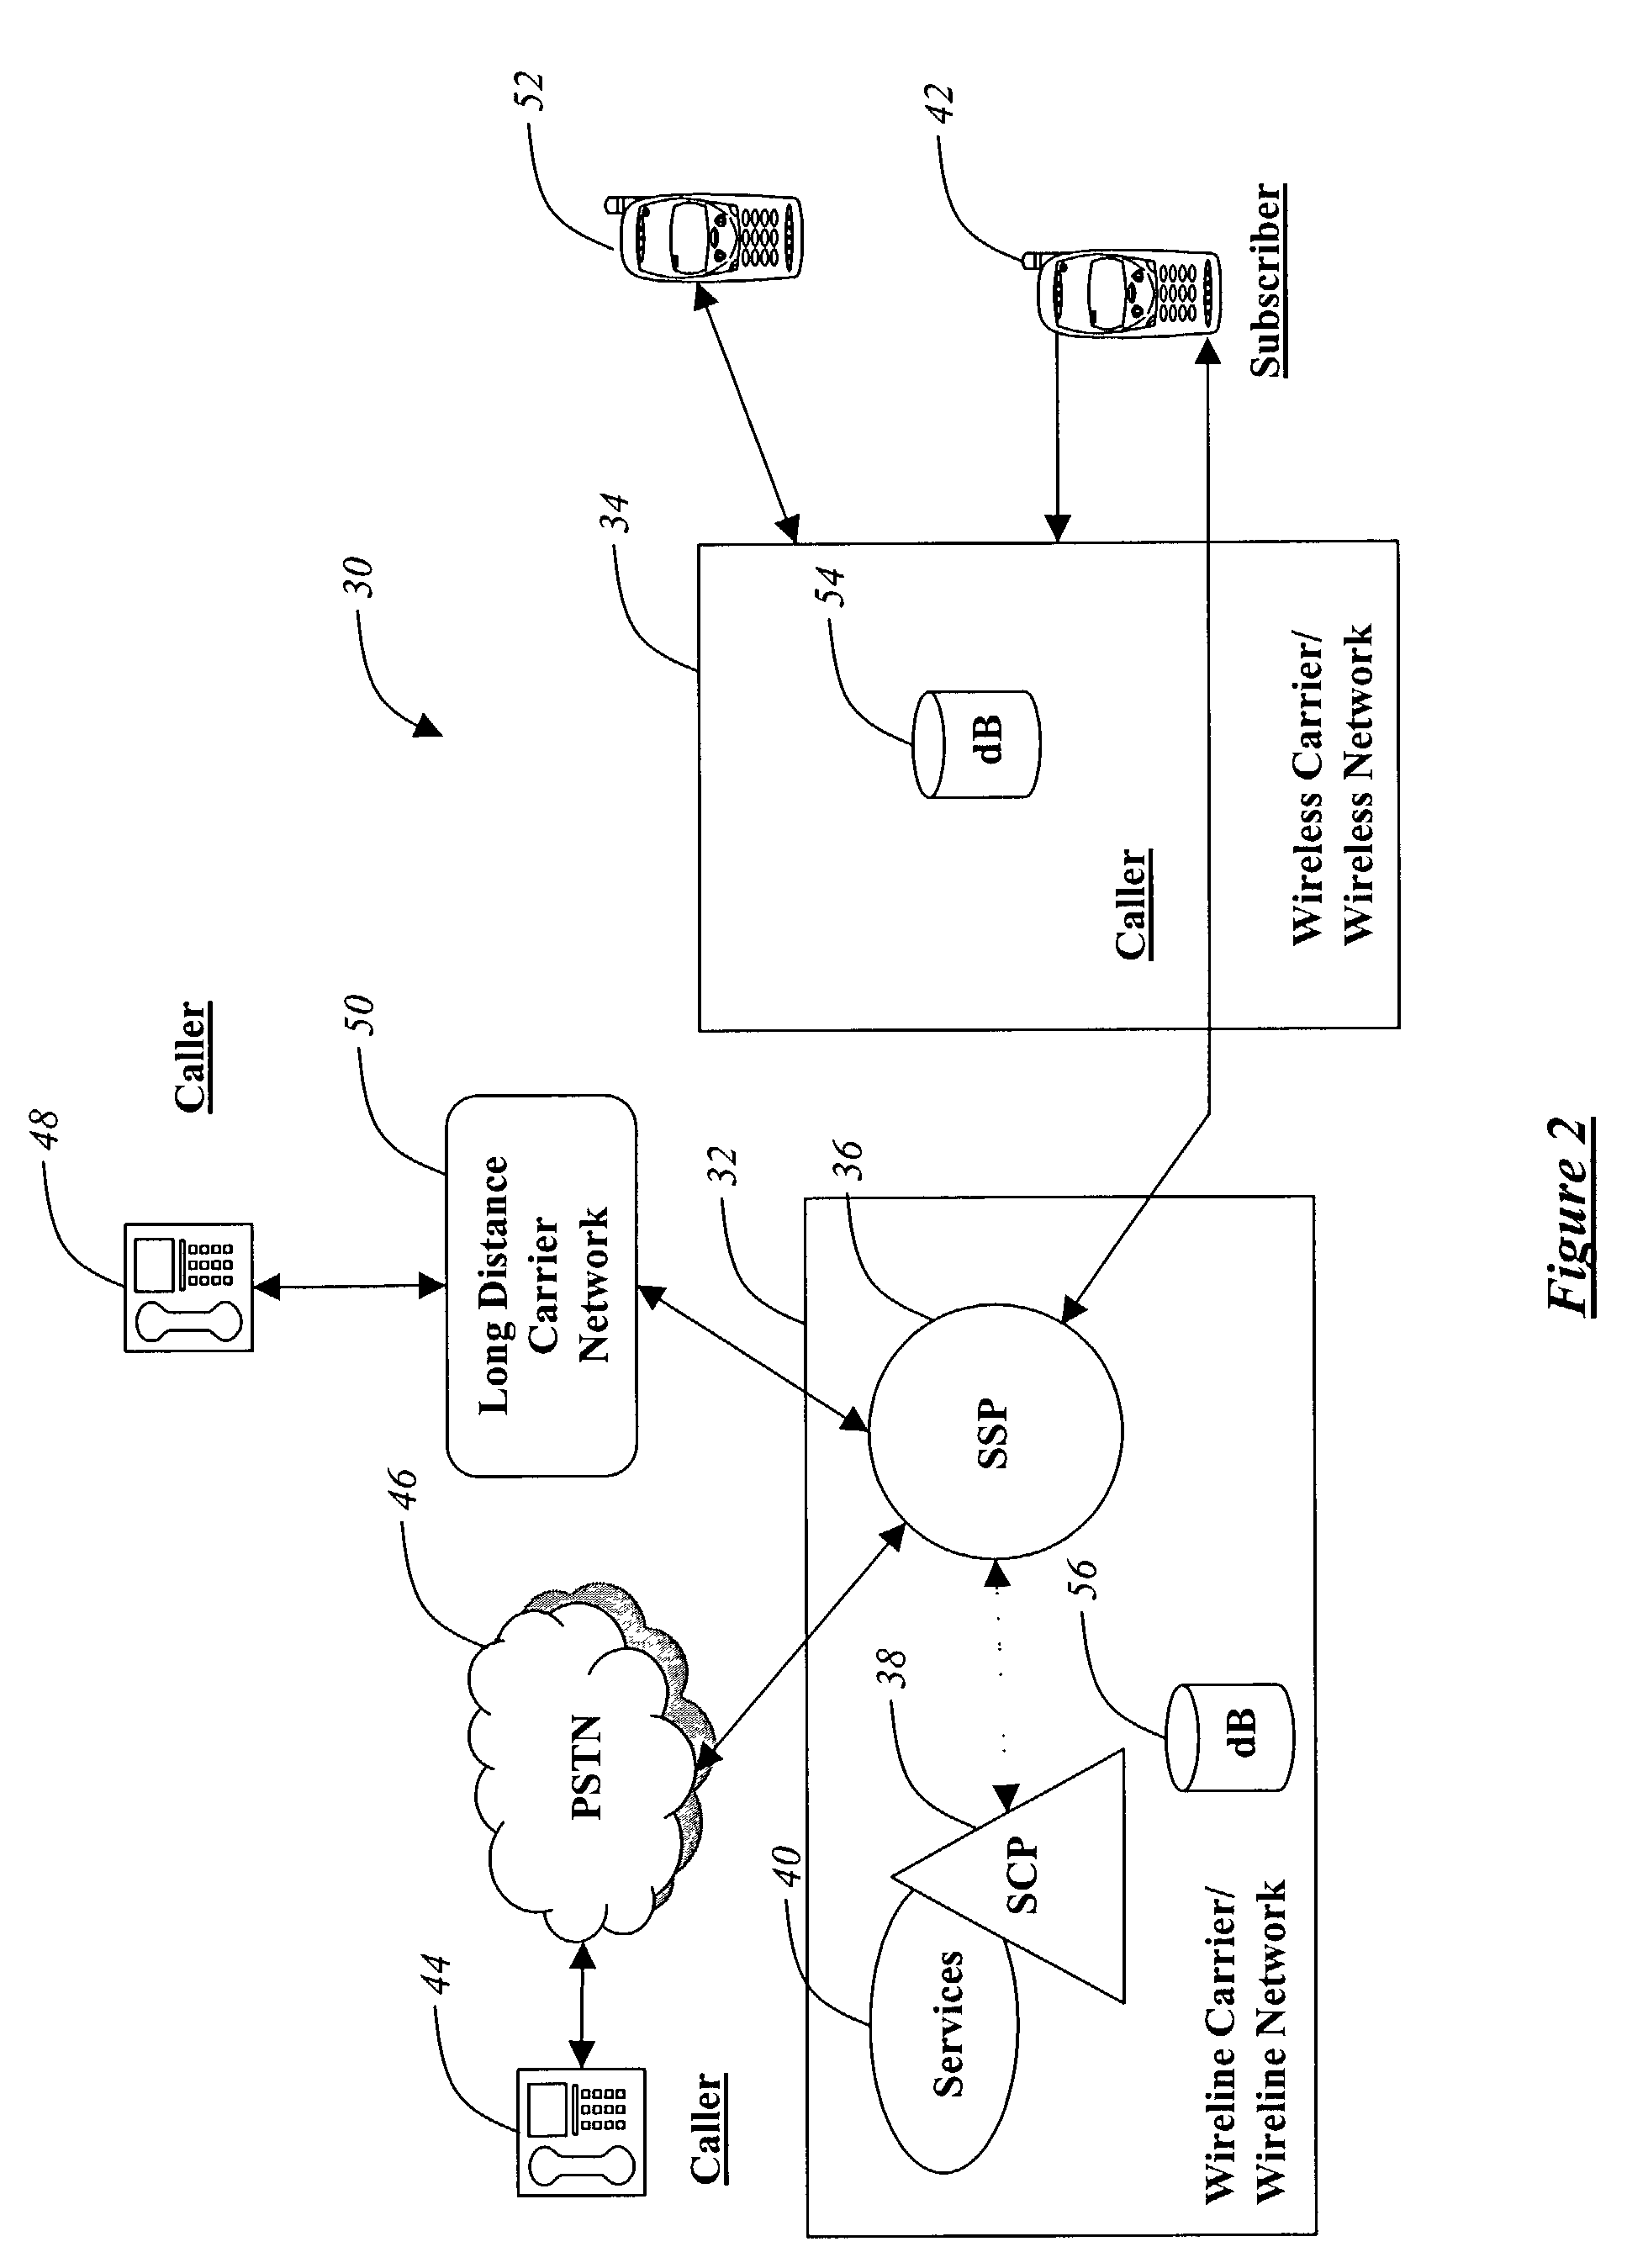 System and method for providing advanced telephony services using a virtual telephone number